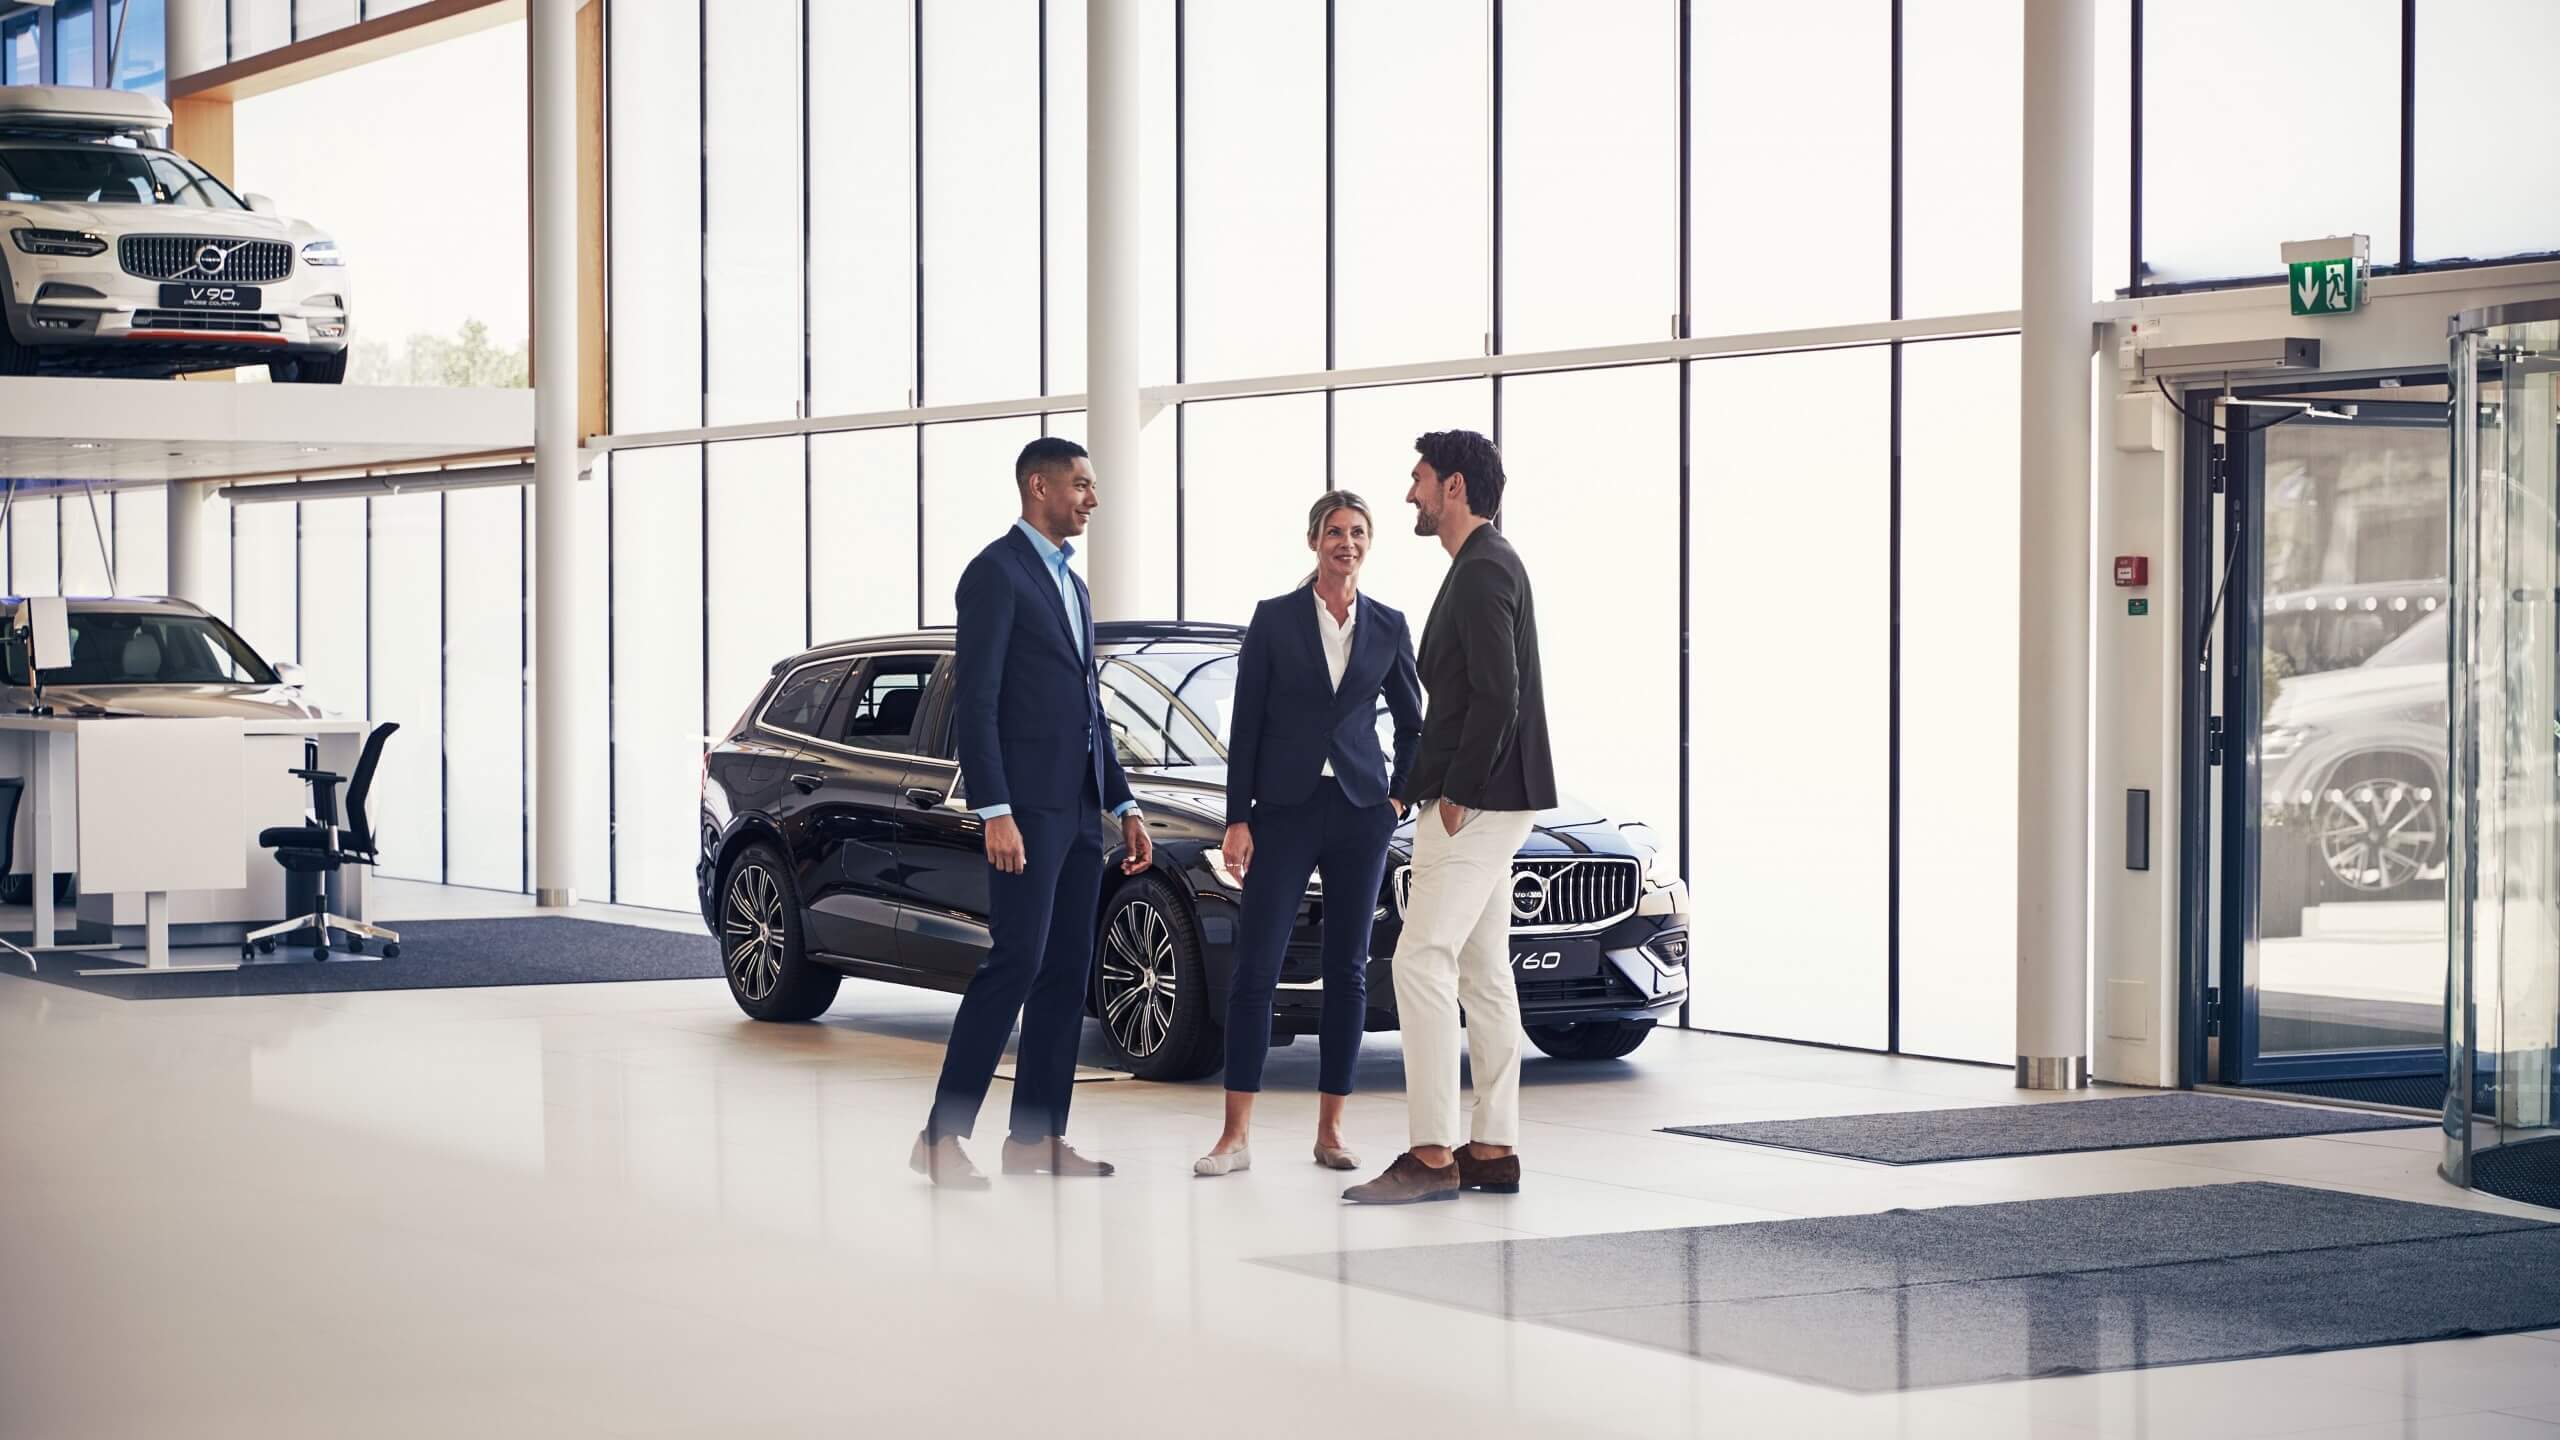 A Volvo dealer/retailer showroom in the background and a sales agent with custormers chatting.